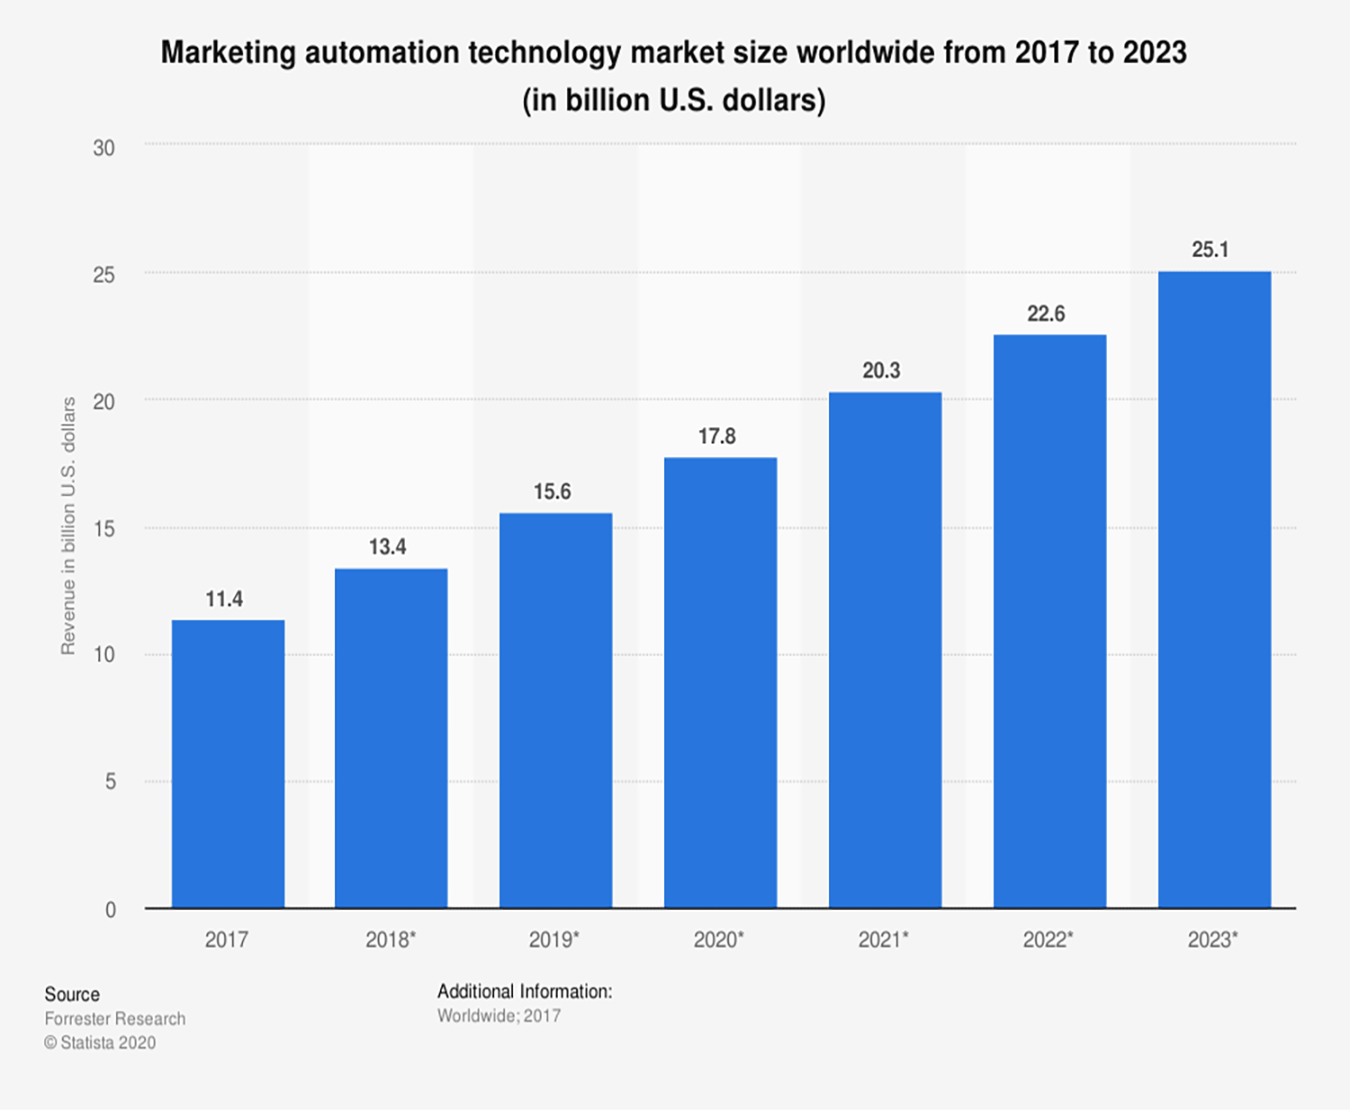 marketing automation and personalization driving increase in global market size for marketing automation from $11.4B in 2017 to $20.3B in 2021 with projections that it will reach $25.1B by 2023